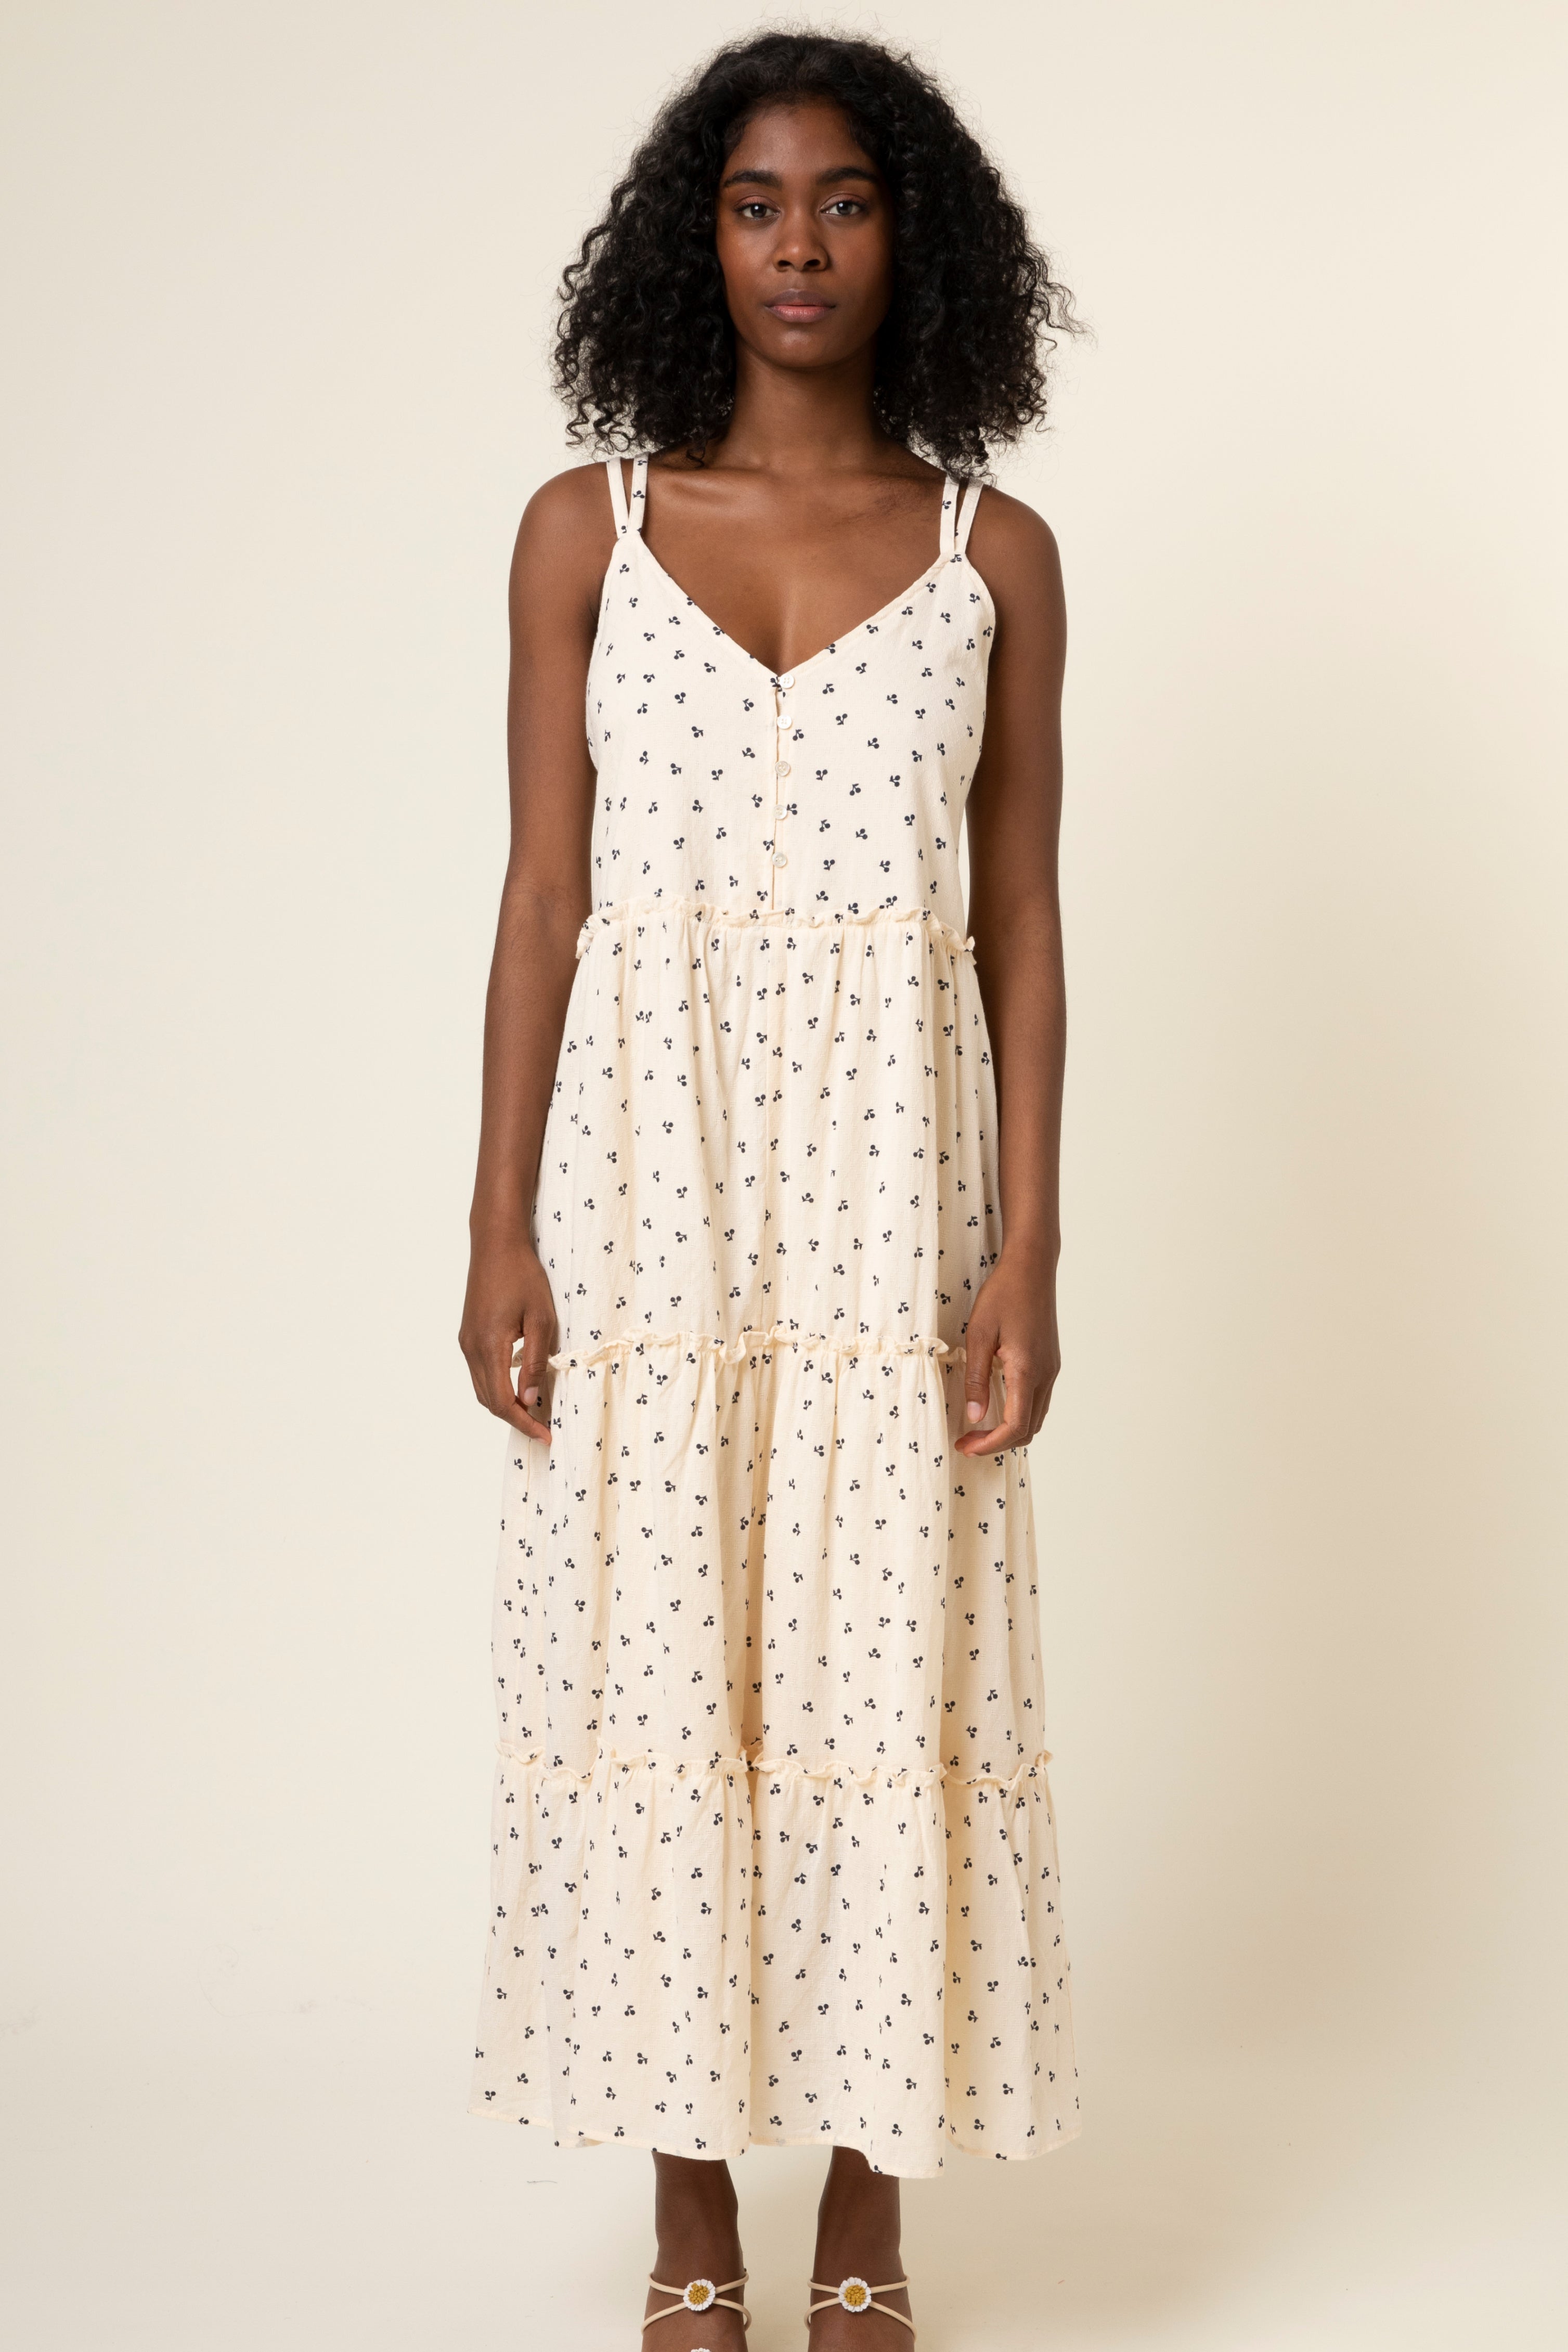 The Elise Woven Strappy Back Dress by FRNCH